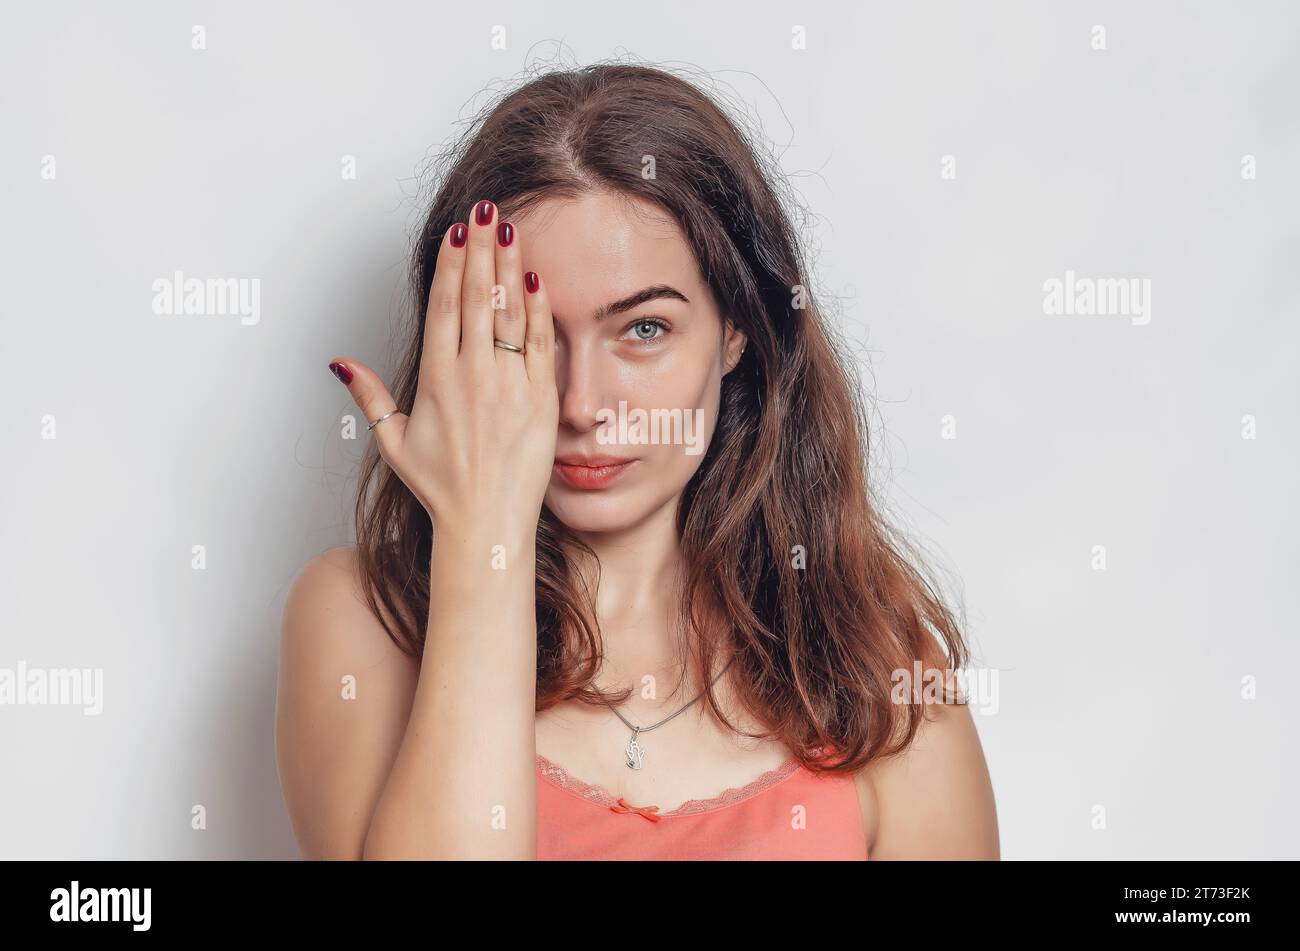 Cute woman with black hair covers her eye witr hand. Face close-up. Stock Photo